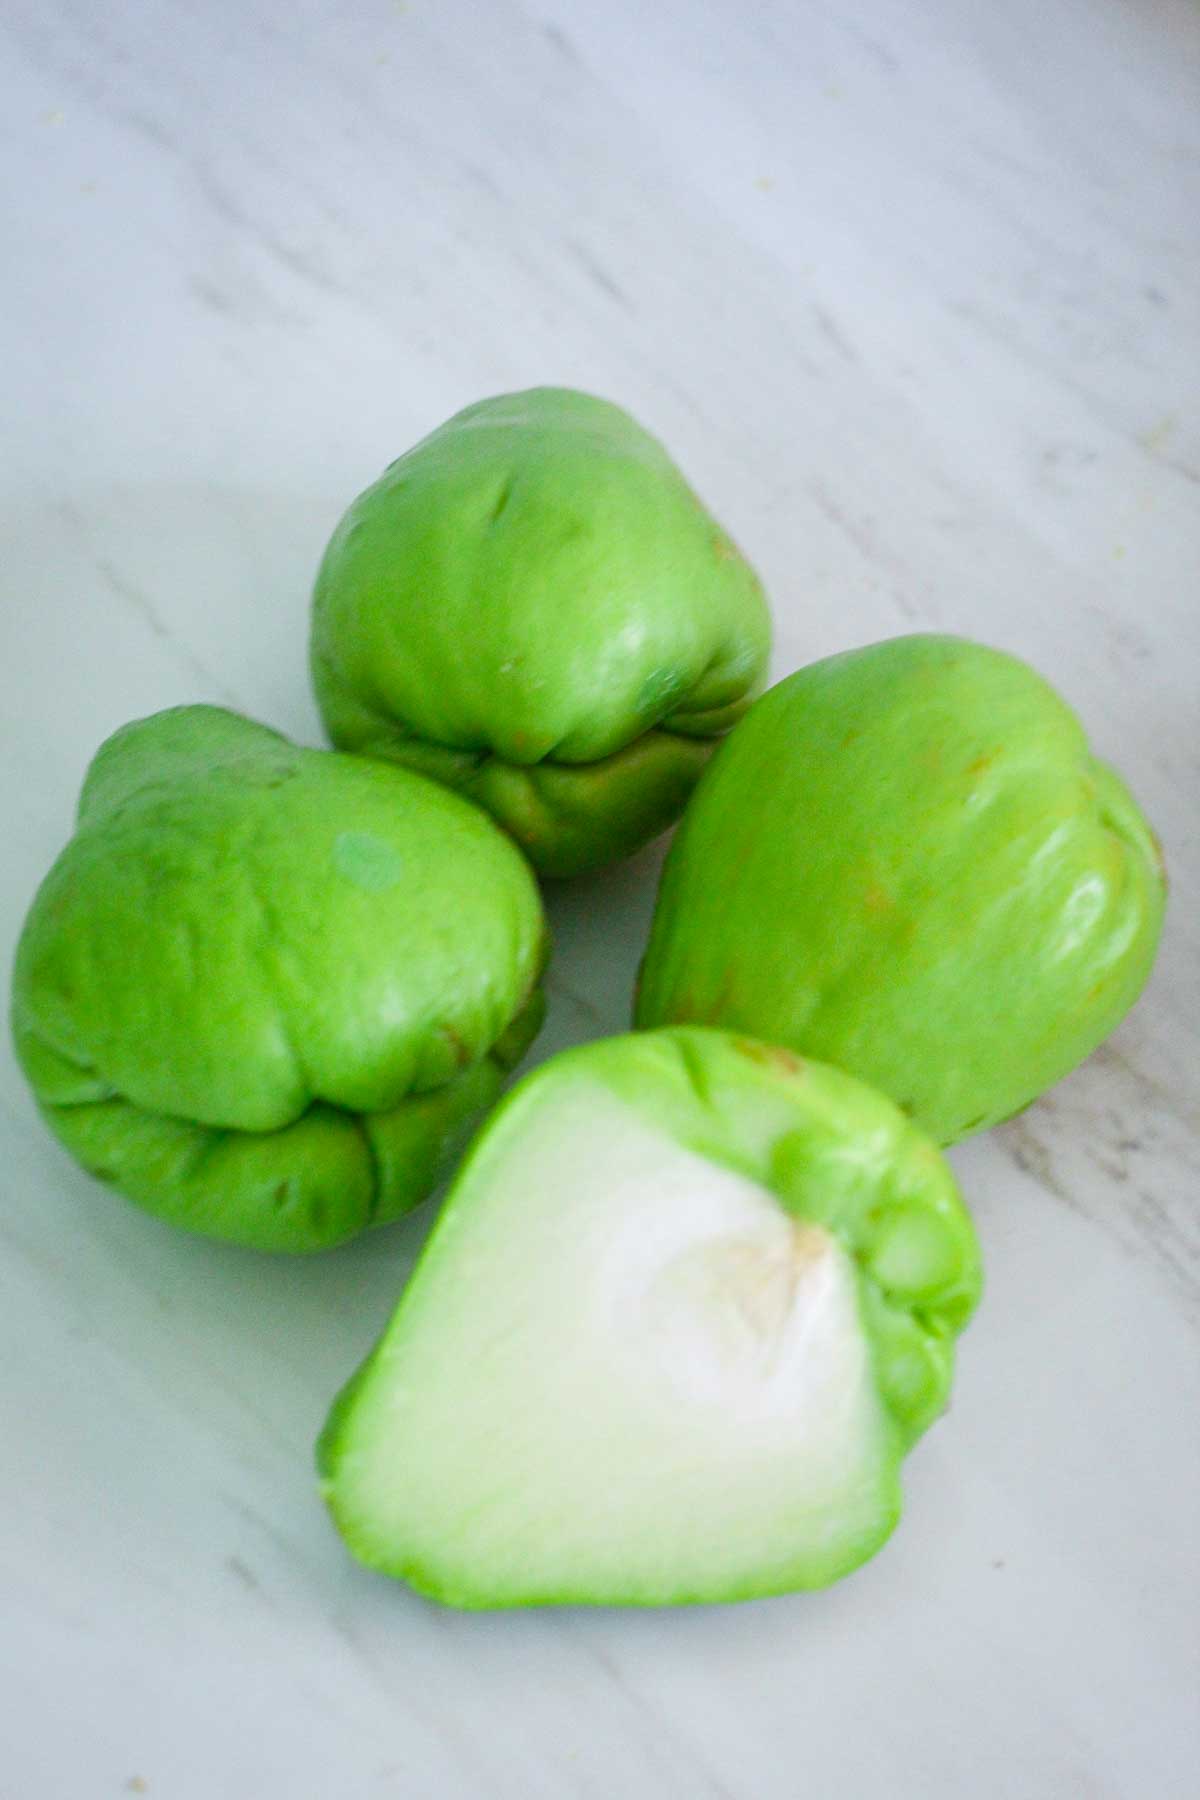 Four chayote squash on the counter, one is cut in half to show the interior of the fruit.